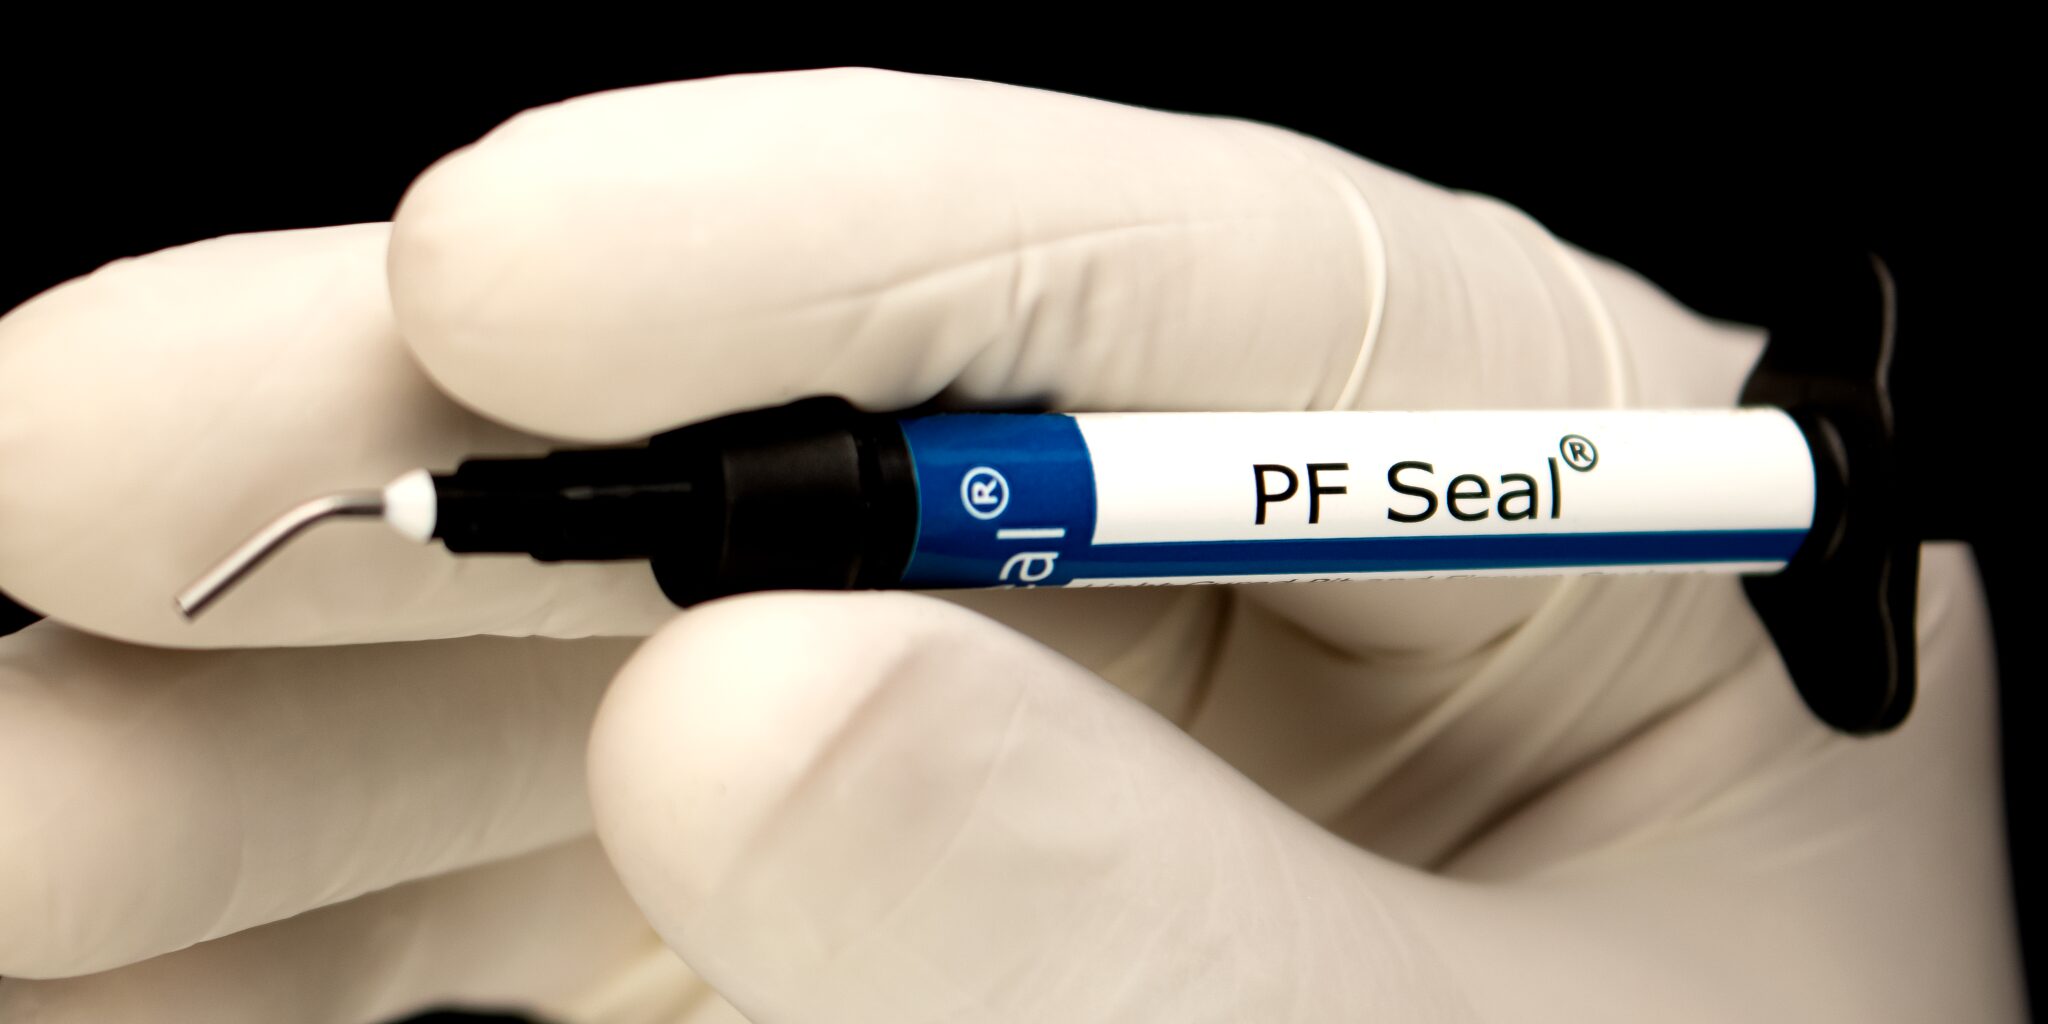 Light Cured Pit and Fissure Sealant: PF Seal